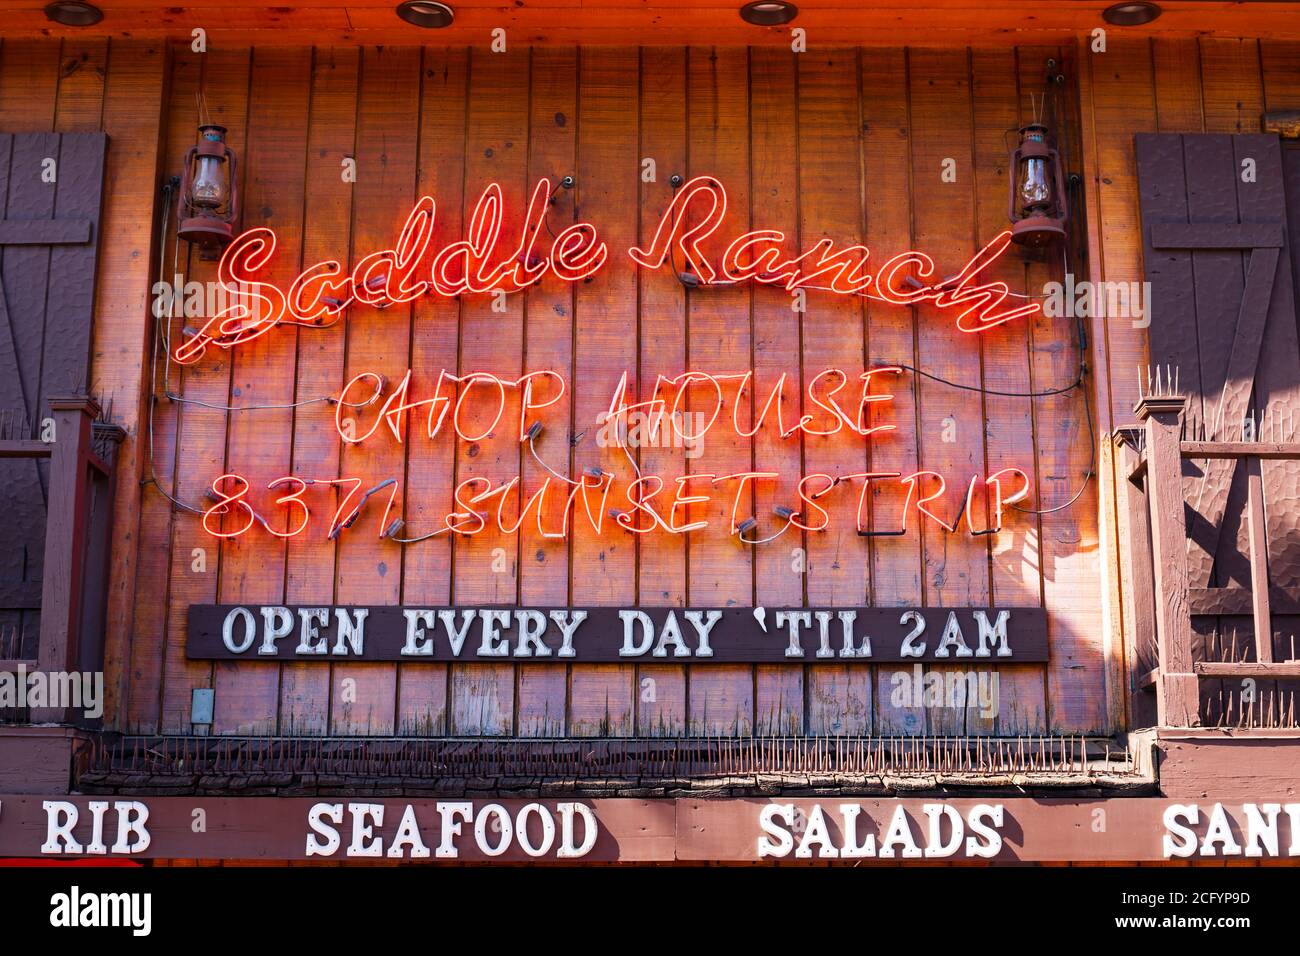 Neonschild Saddle Ranch Chop House and Bakery, 8371 Sunset Boulevard, West Hollywood, Los Angeles, Kalifornien, USA Stockfoto